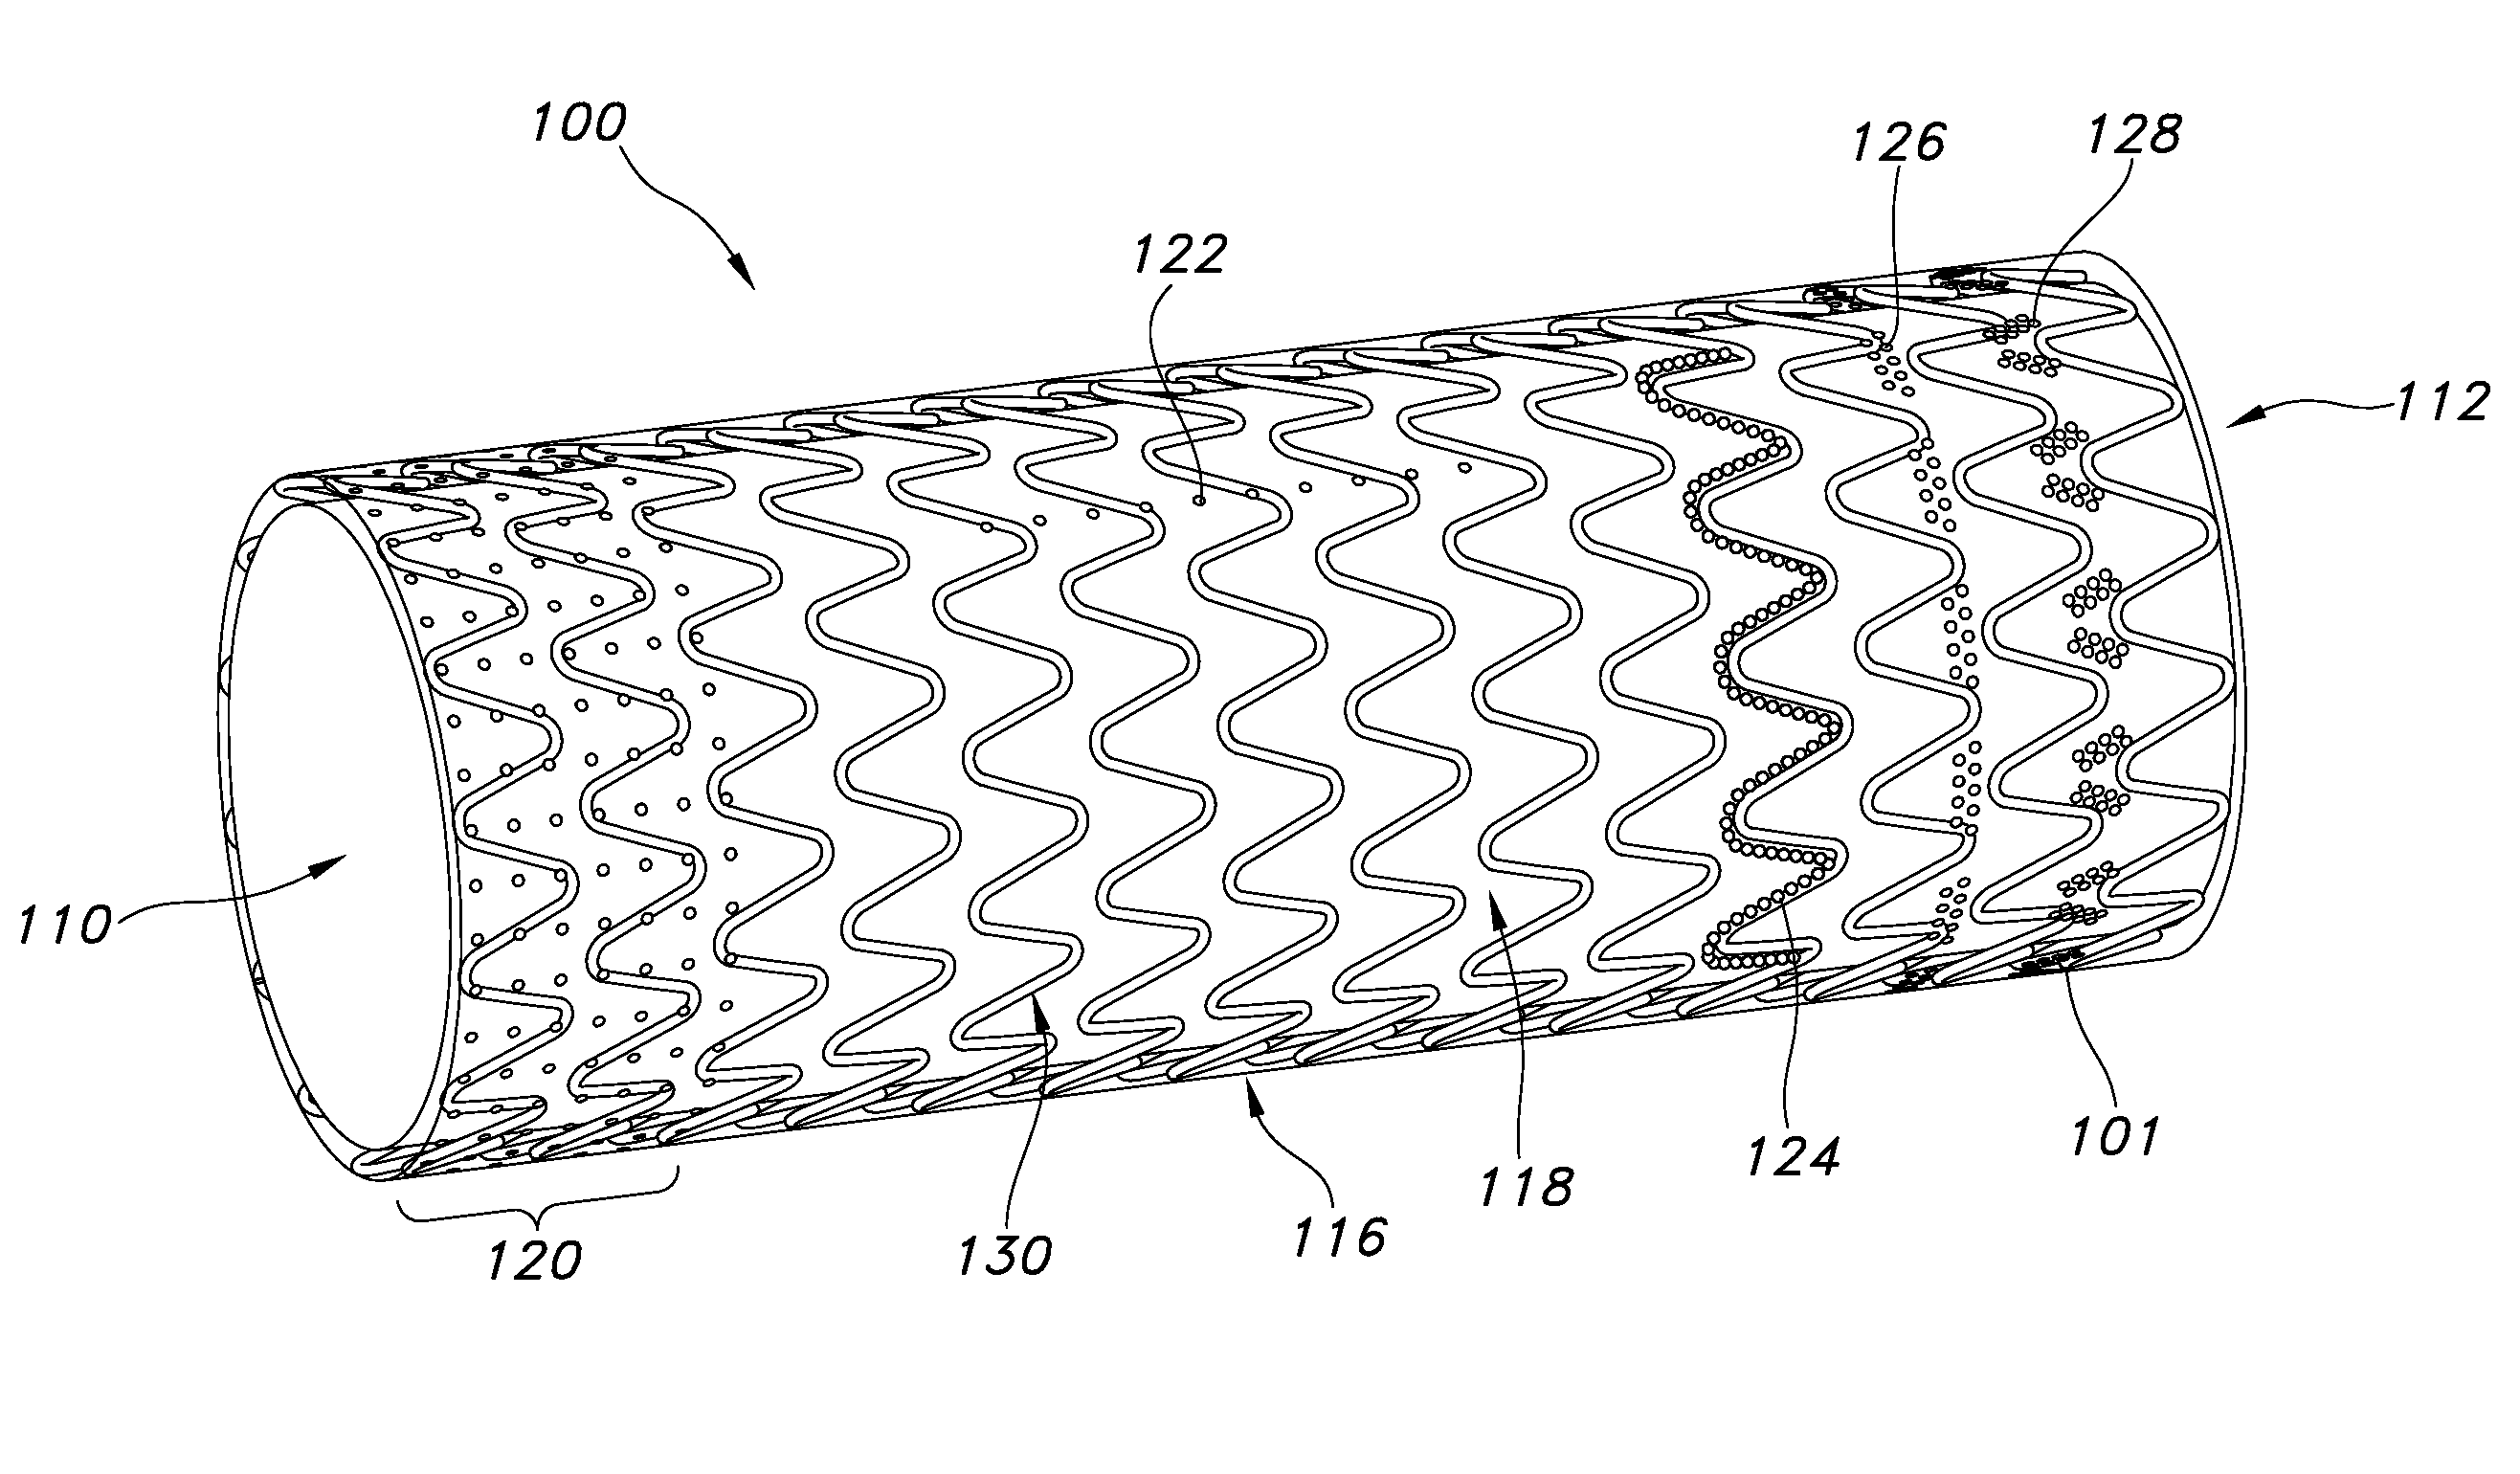 Flexible stent-graft device having patterned polymeric coverings